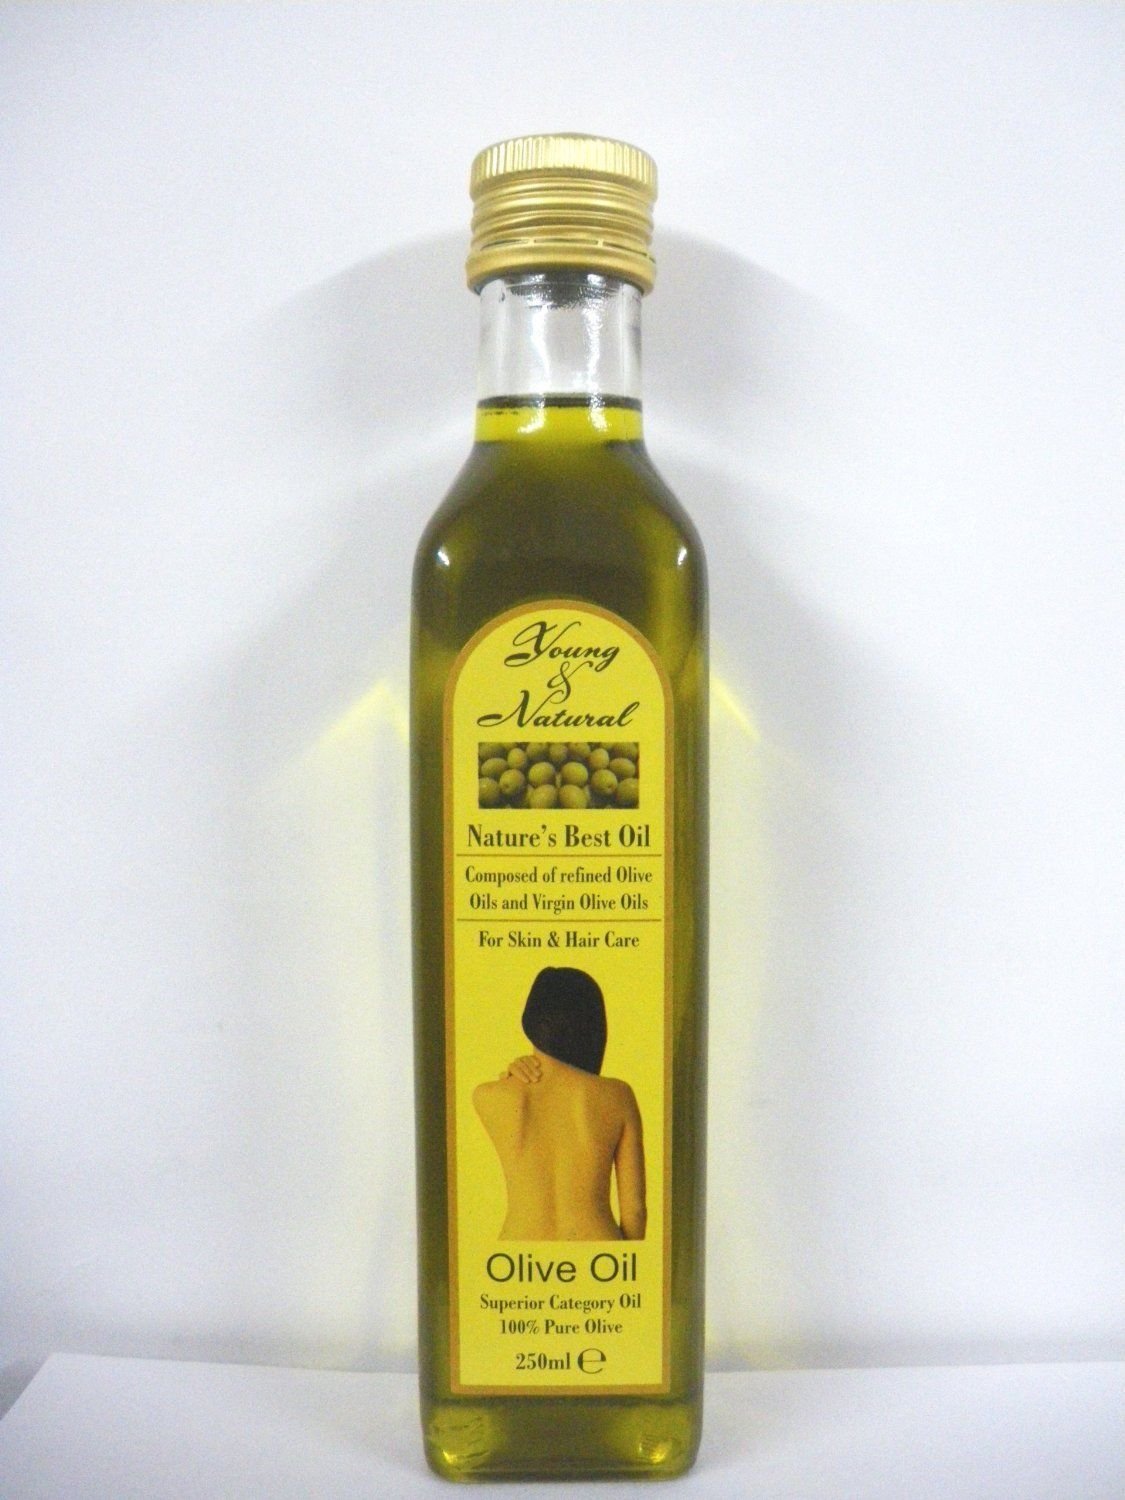 Оливковое масло используется. Abril Pure Olive Oil 250ml. Масло Пур олив боди Ойл. Оливковое масло my Olive Oil Superior Extra Virgin. Olive Oil масло для волос.